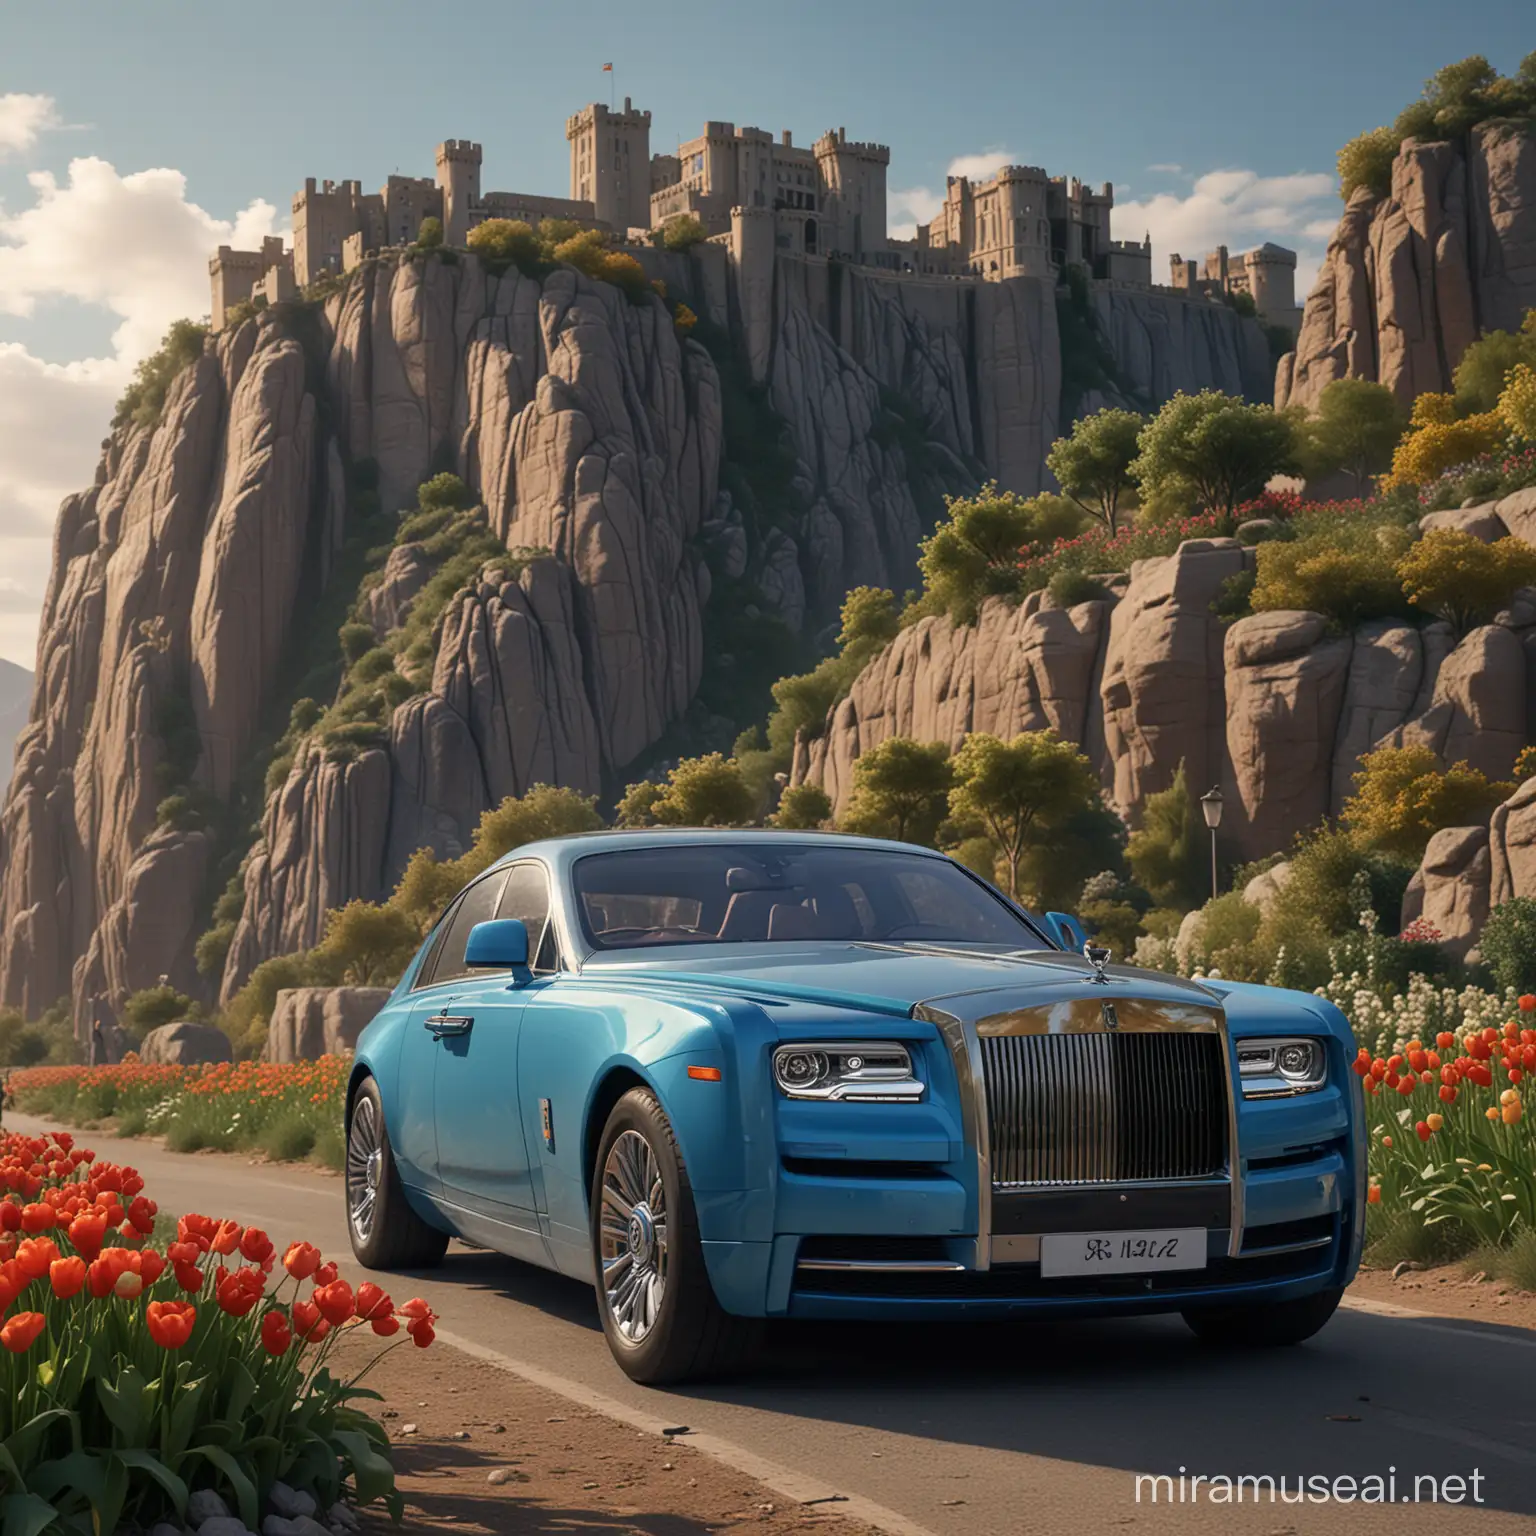 Supergirl and Rolls Royce with Castle and Cheetah in Mountain Landscape